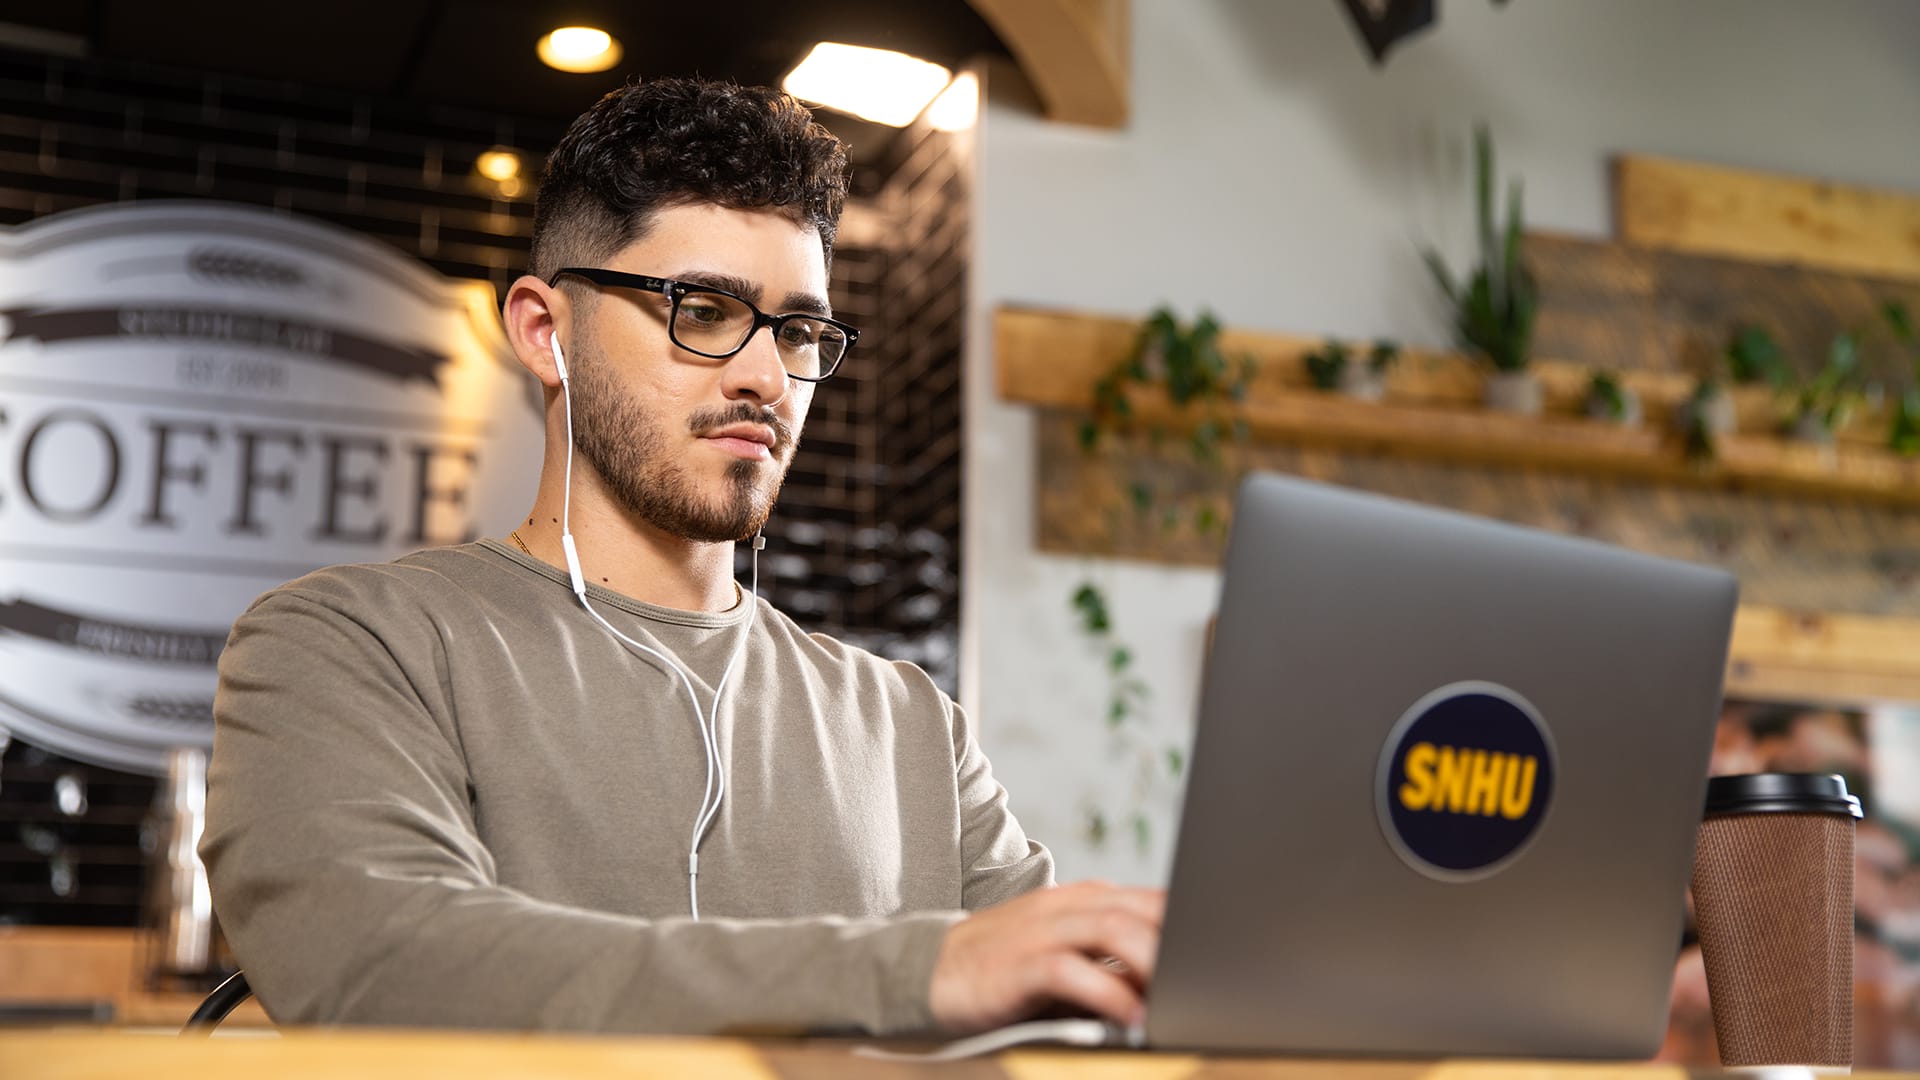 Naeem Jaraysi, who earned his degree from SNHU, wearing ear pods working on his laptop with an SNHU sticker on the front in a coffee shop.